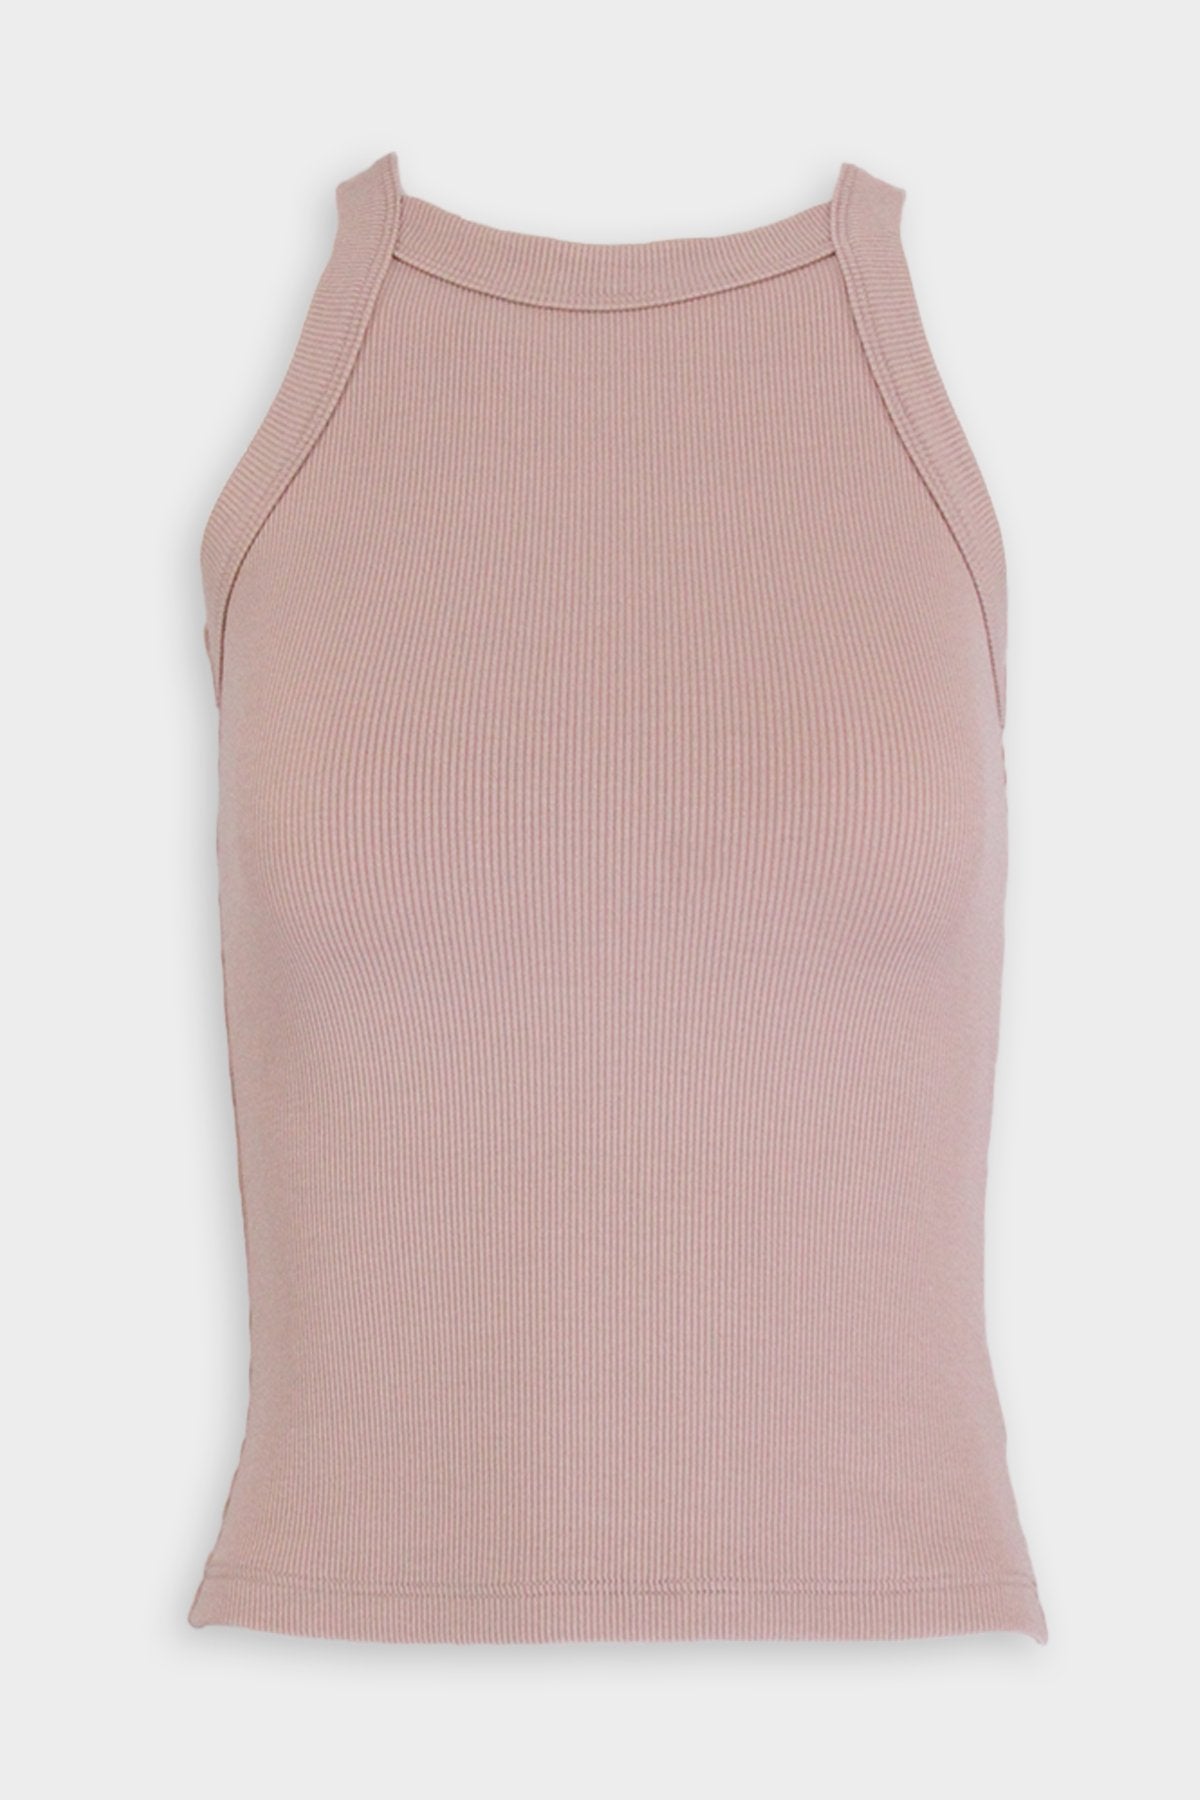 Ribbed Dylan Tank in Nude